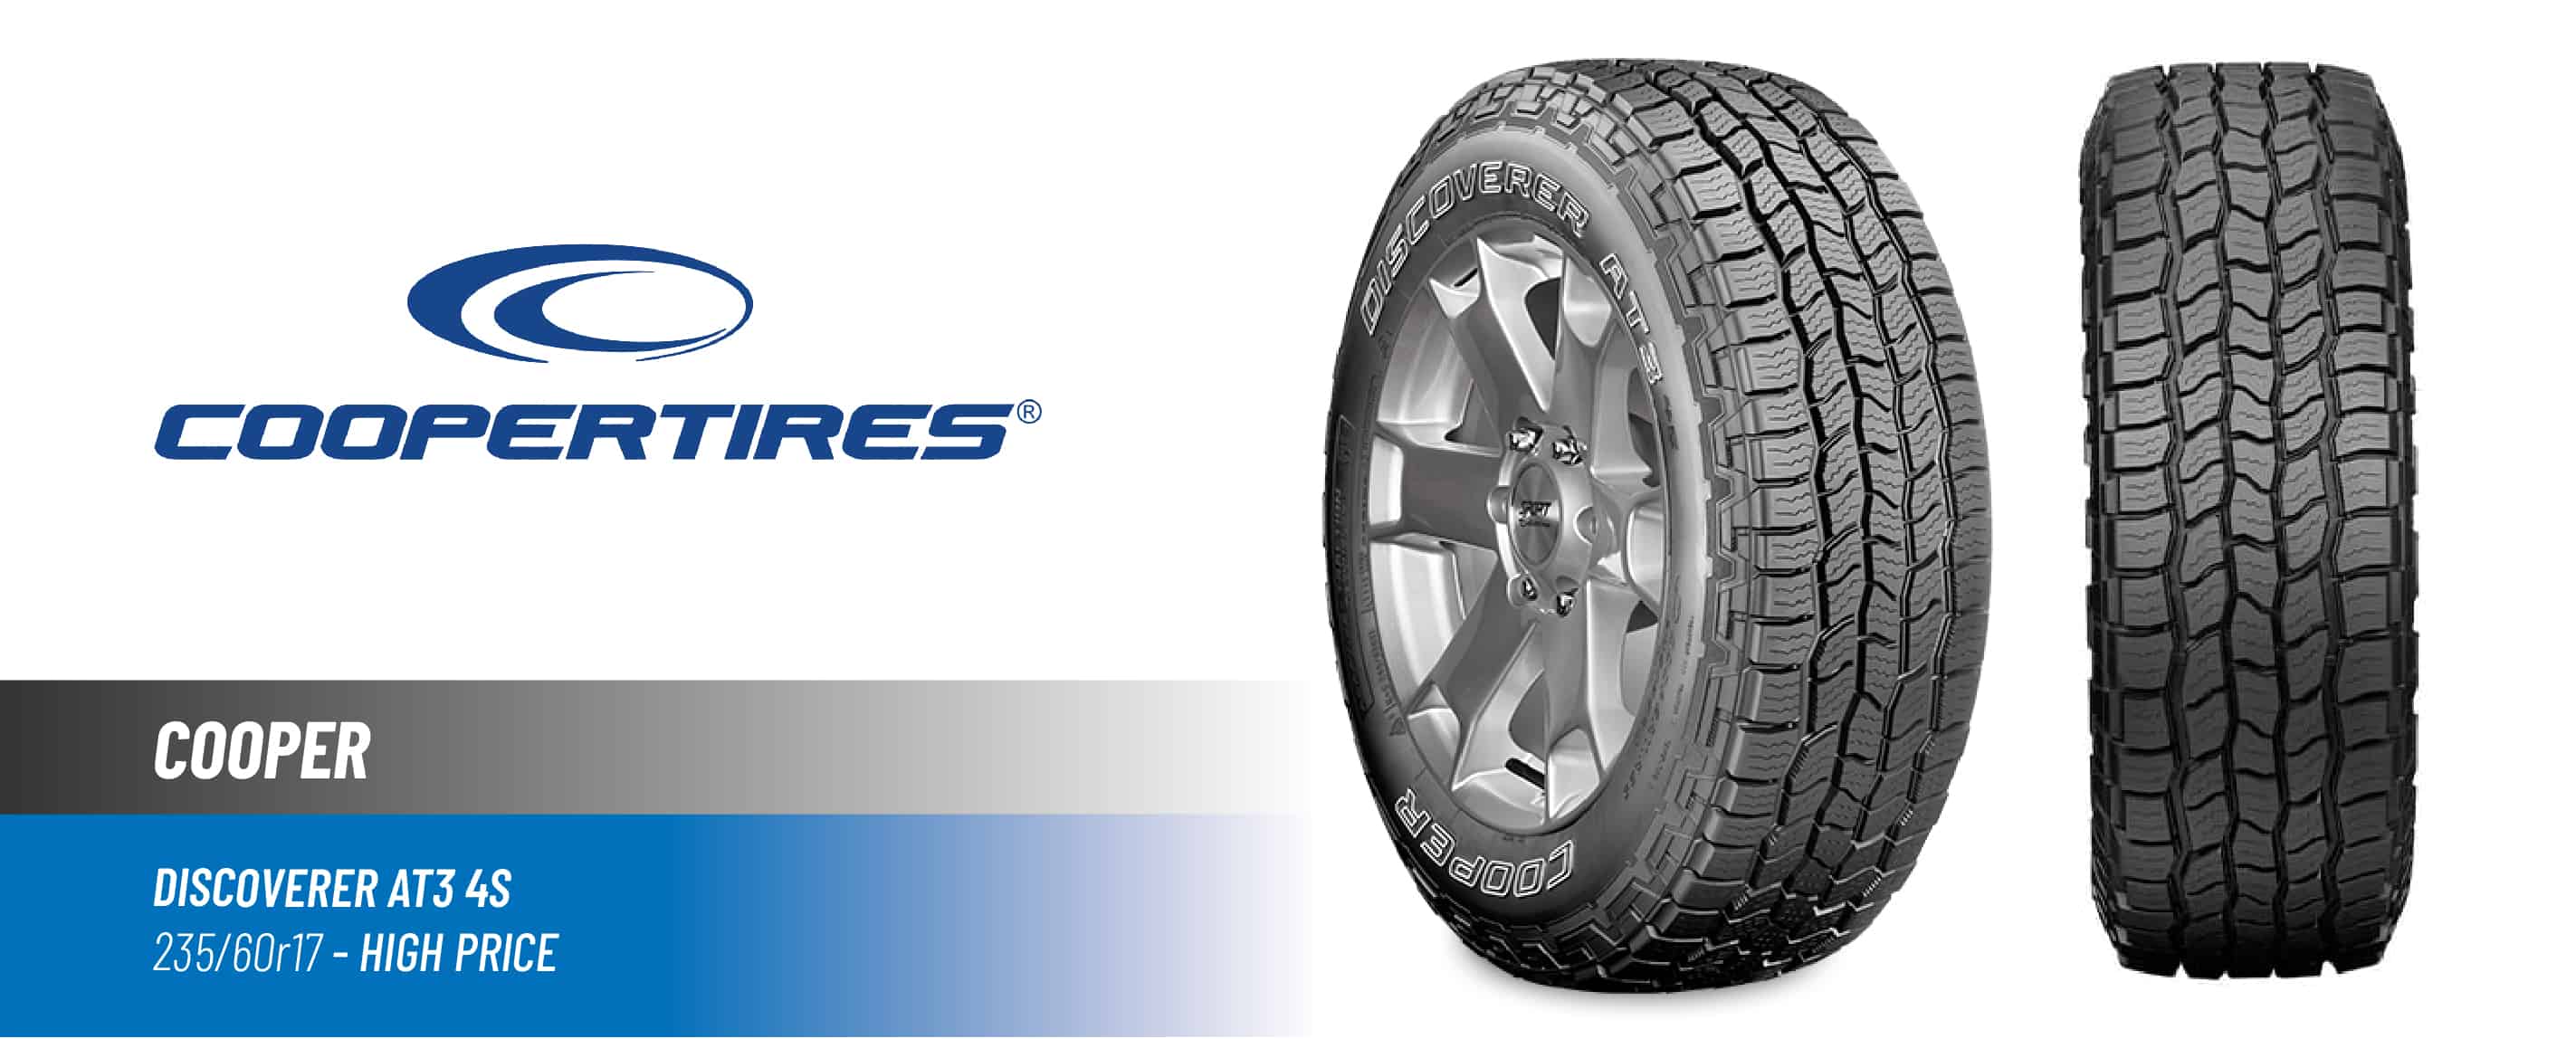 Top#3 High Price: Cooper Discoverer AT3 4S –best 235/60r17